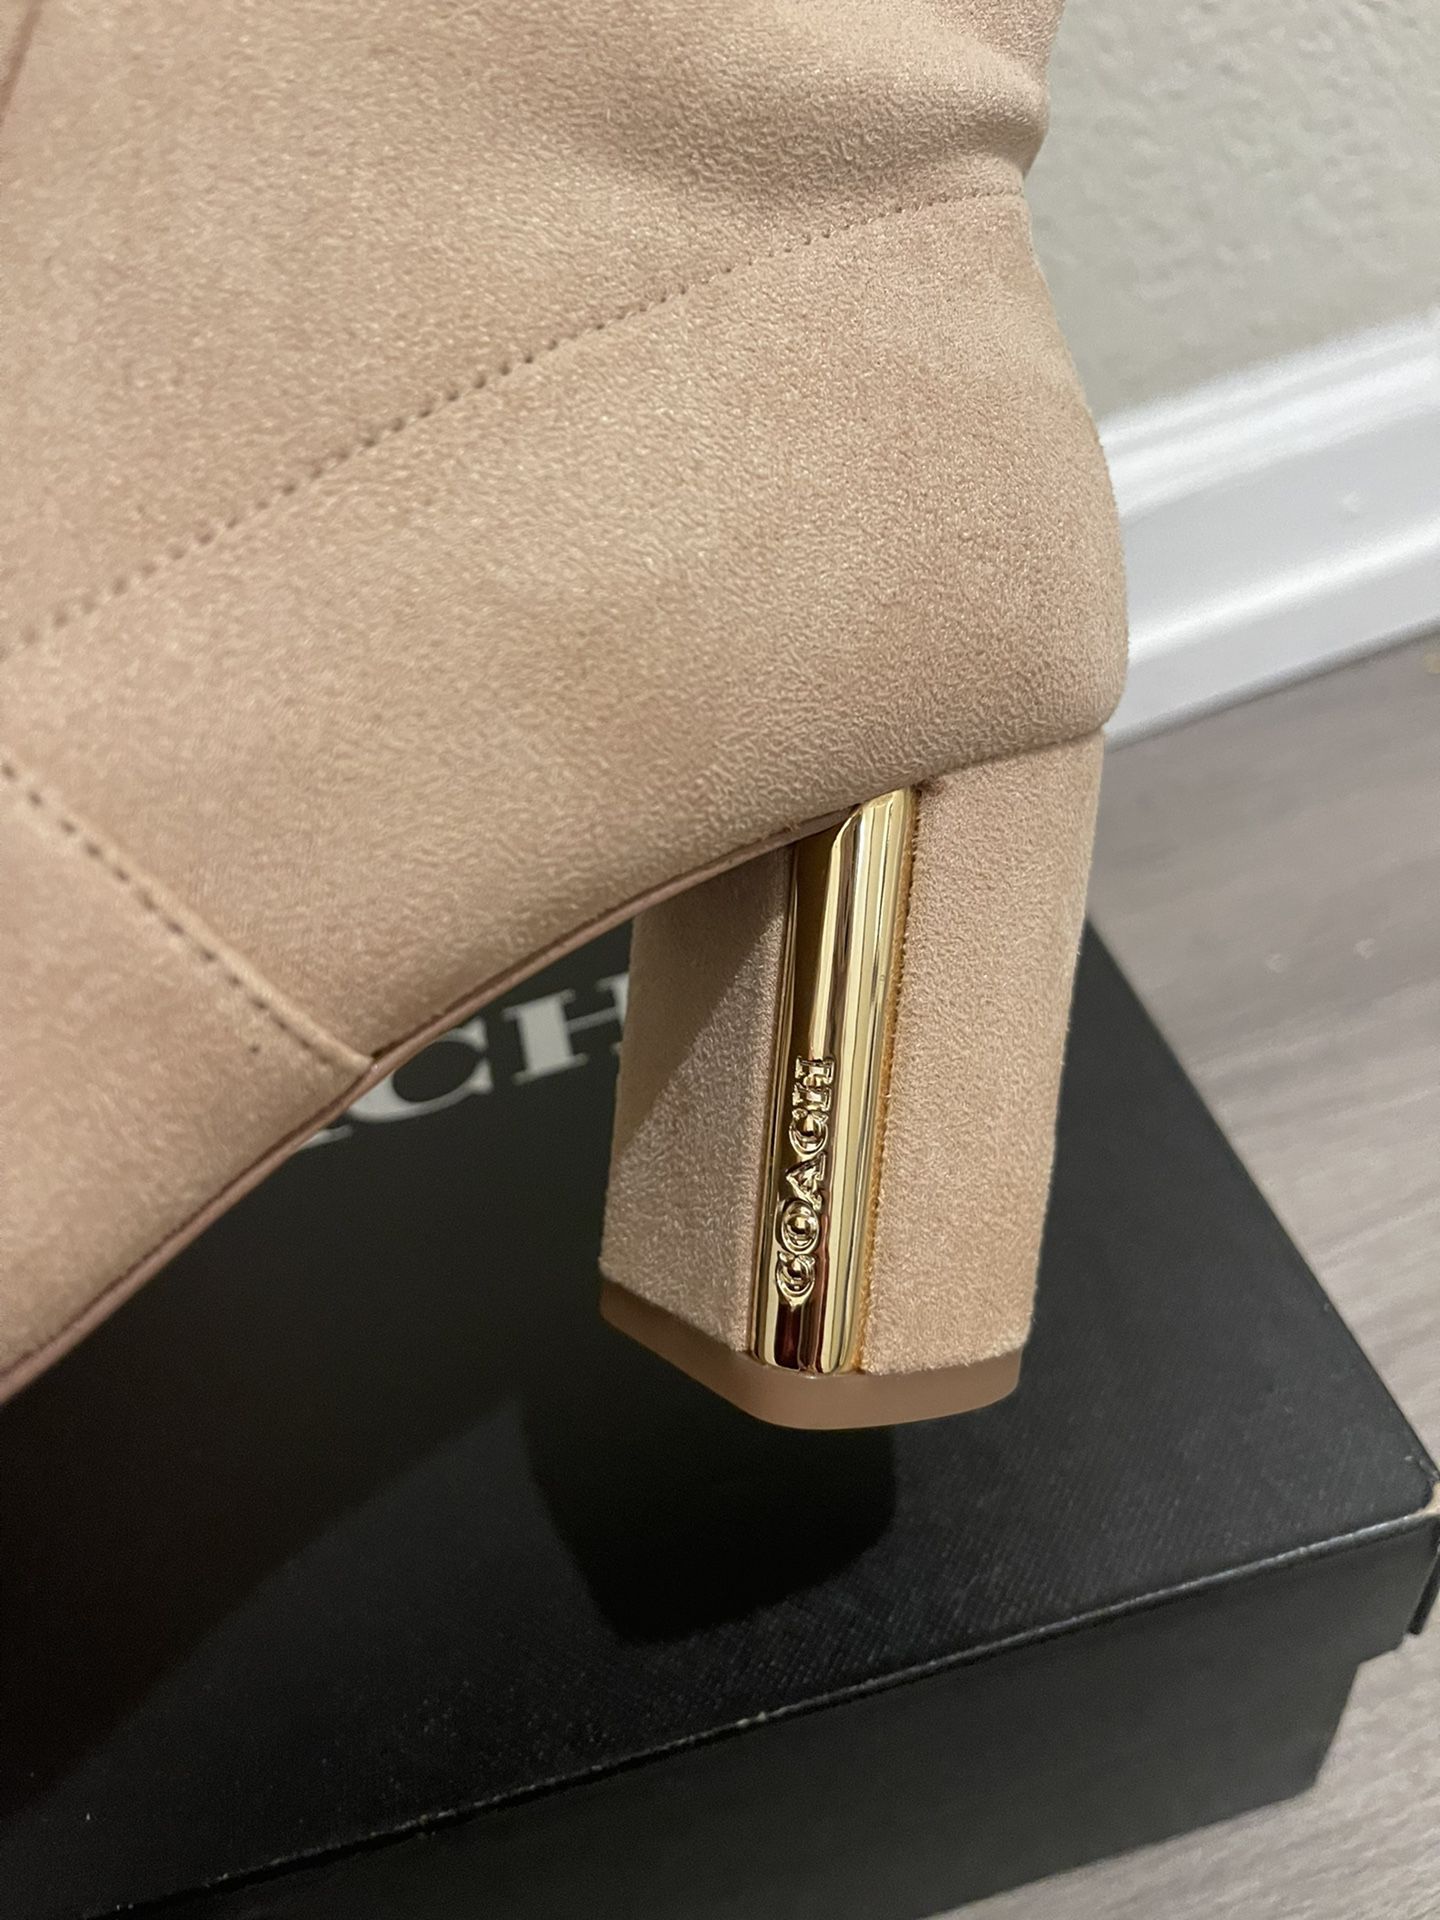 NWT COACH Boots - Margot Suede Booties